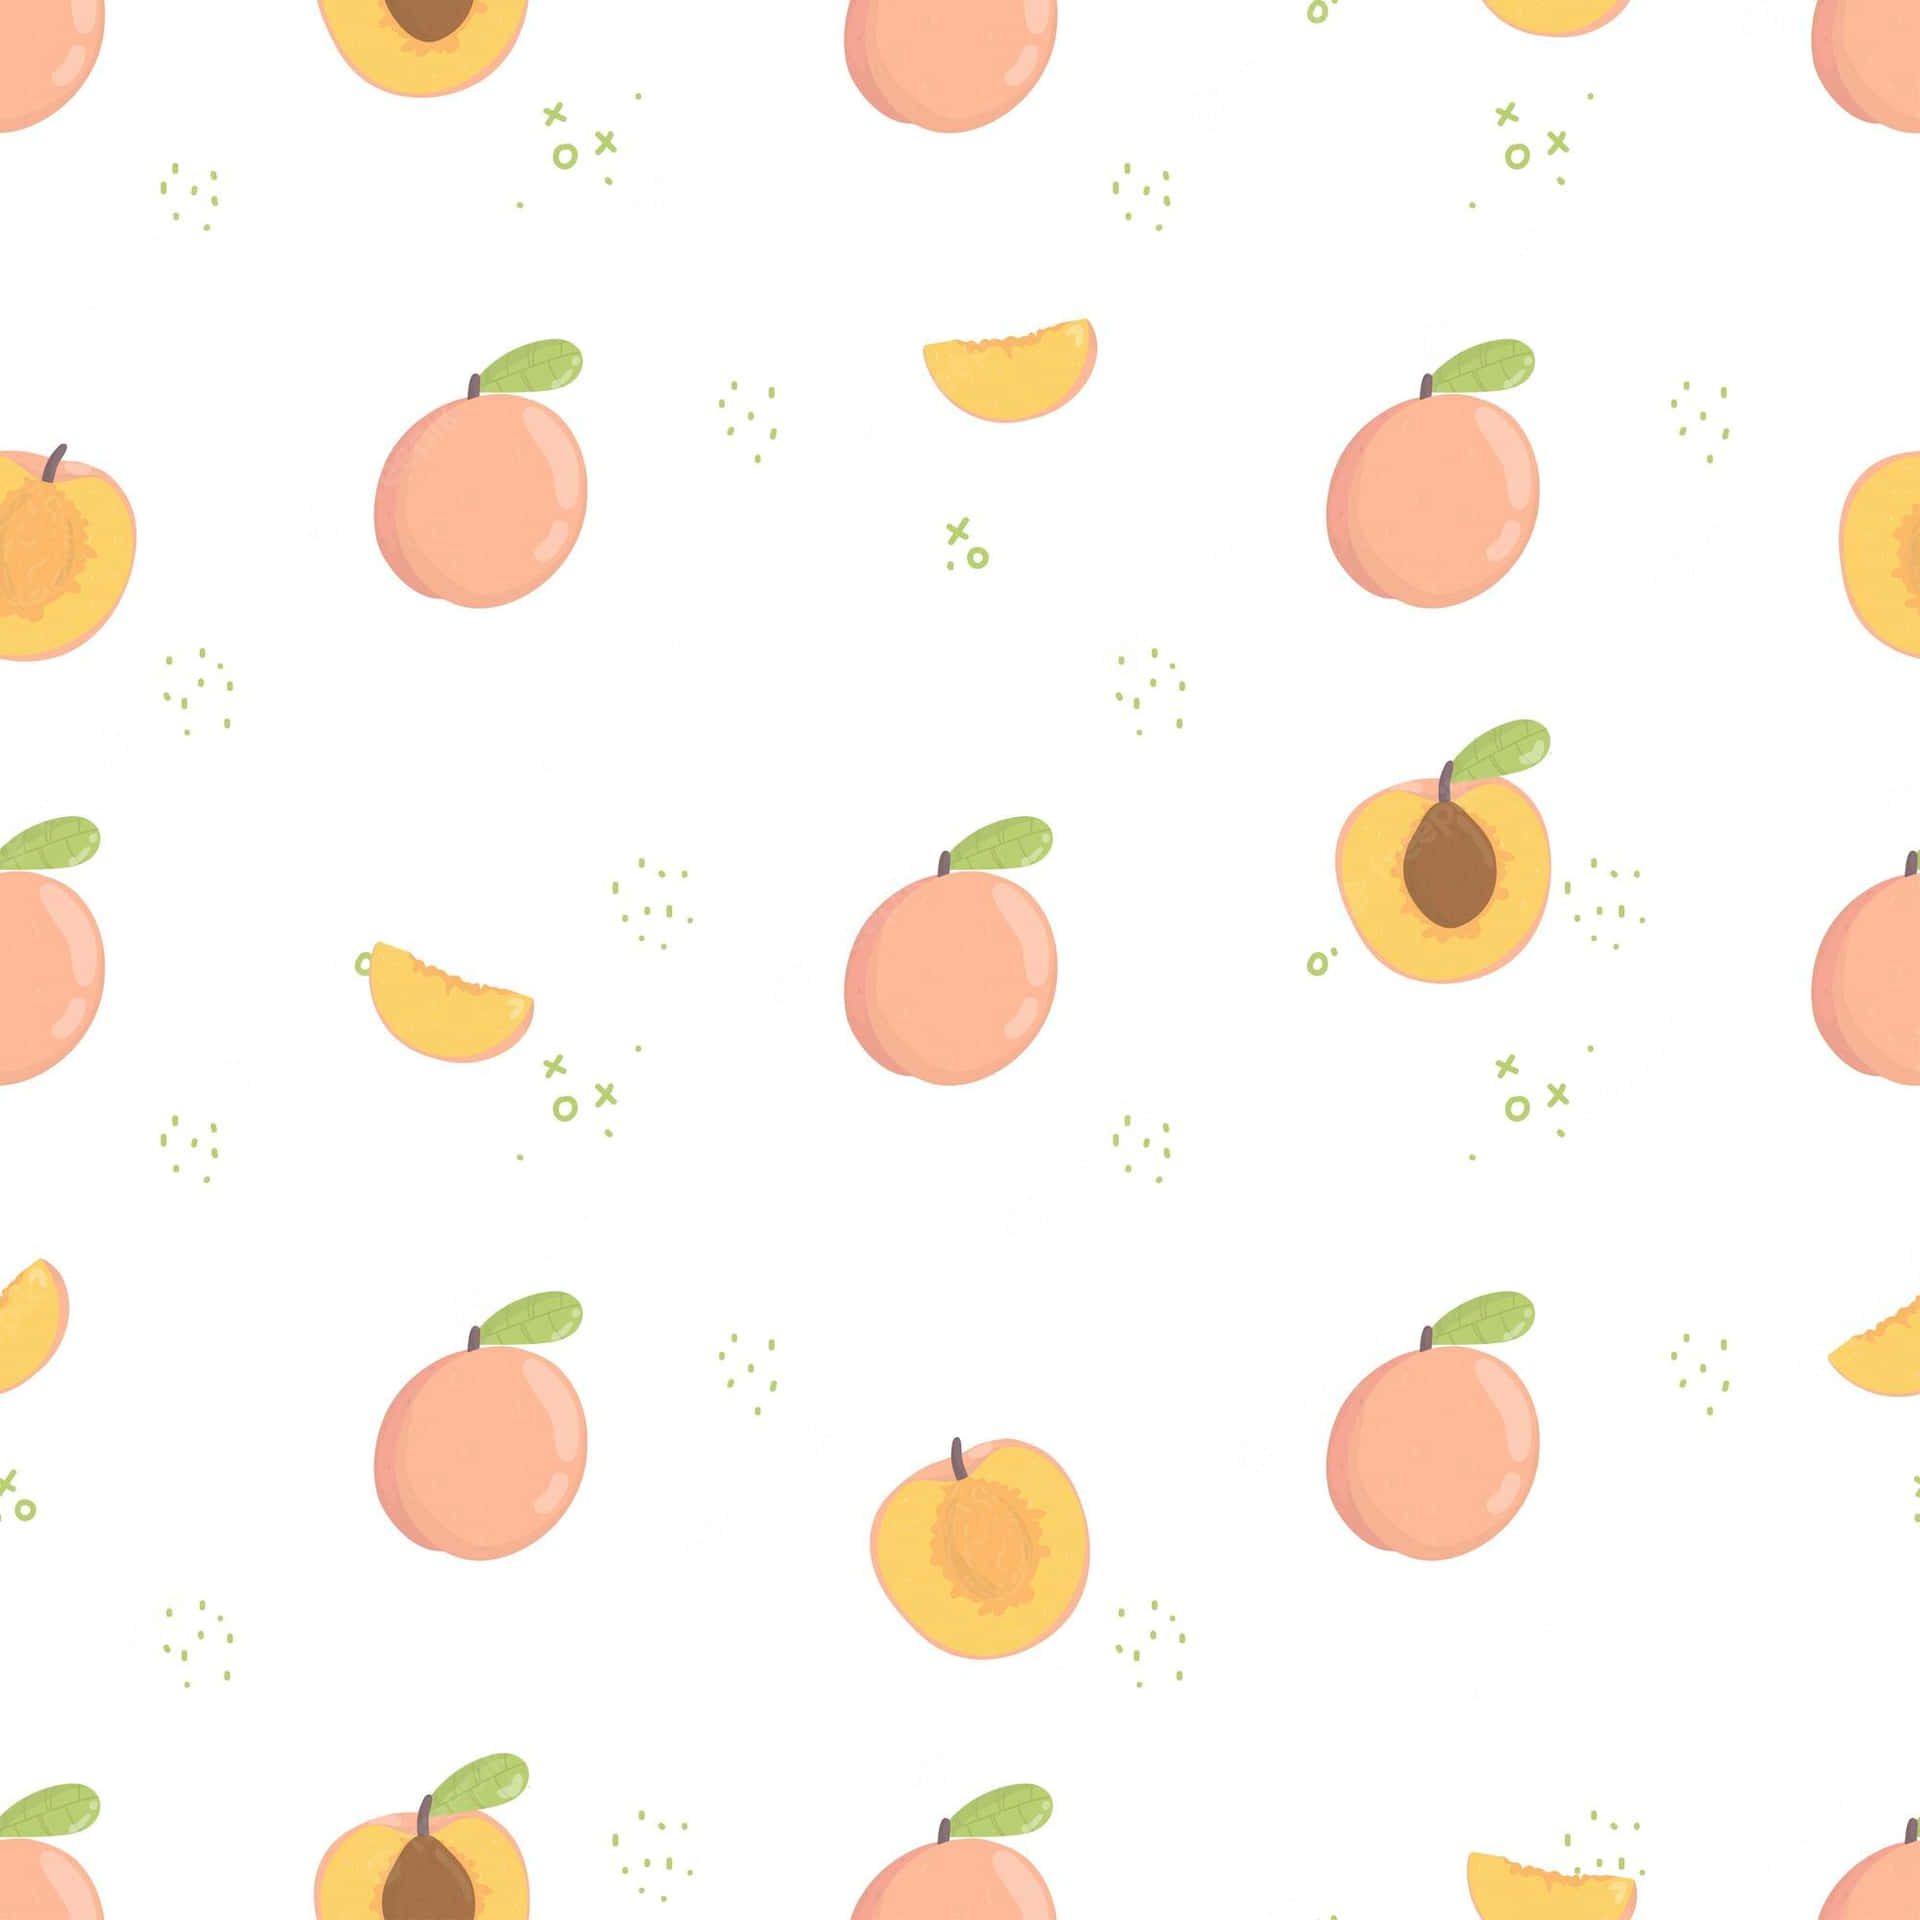 Delicious&Sweet - A Fresh and Juicy Cute Peach Wallpaper